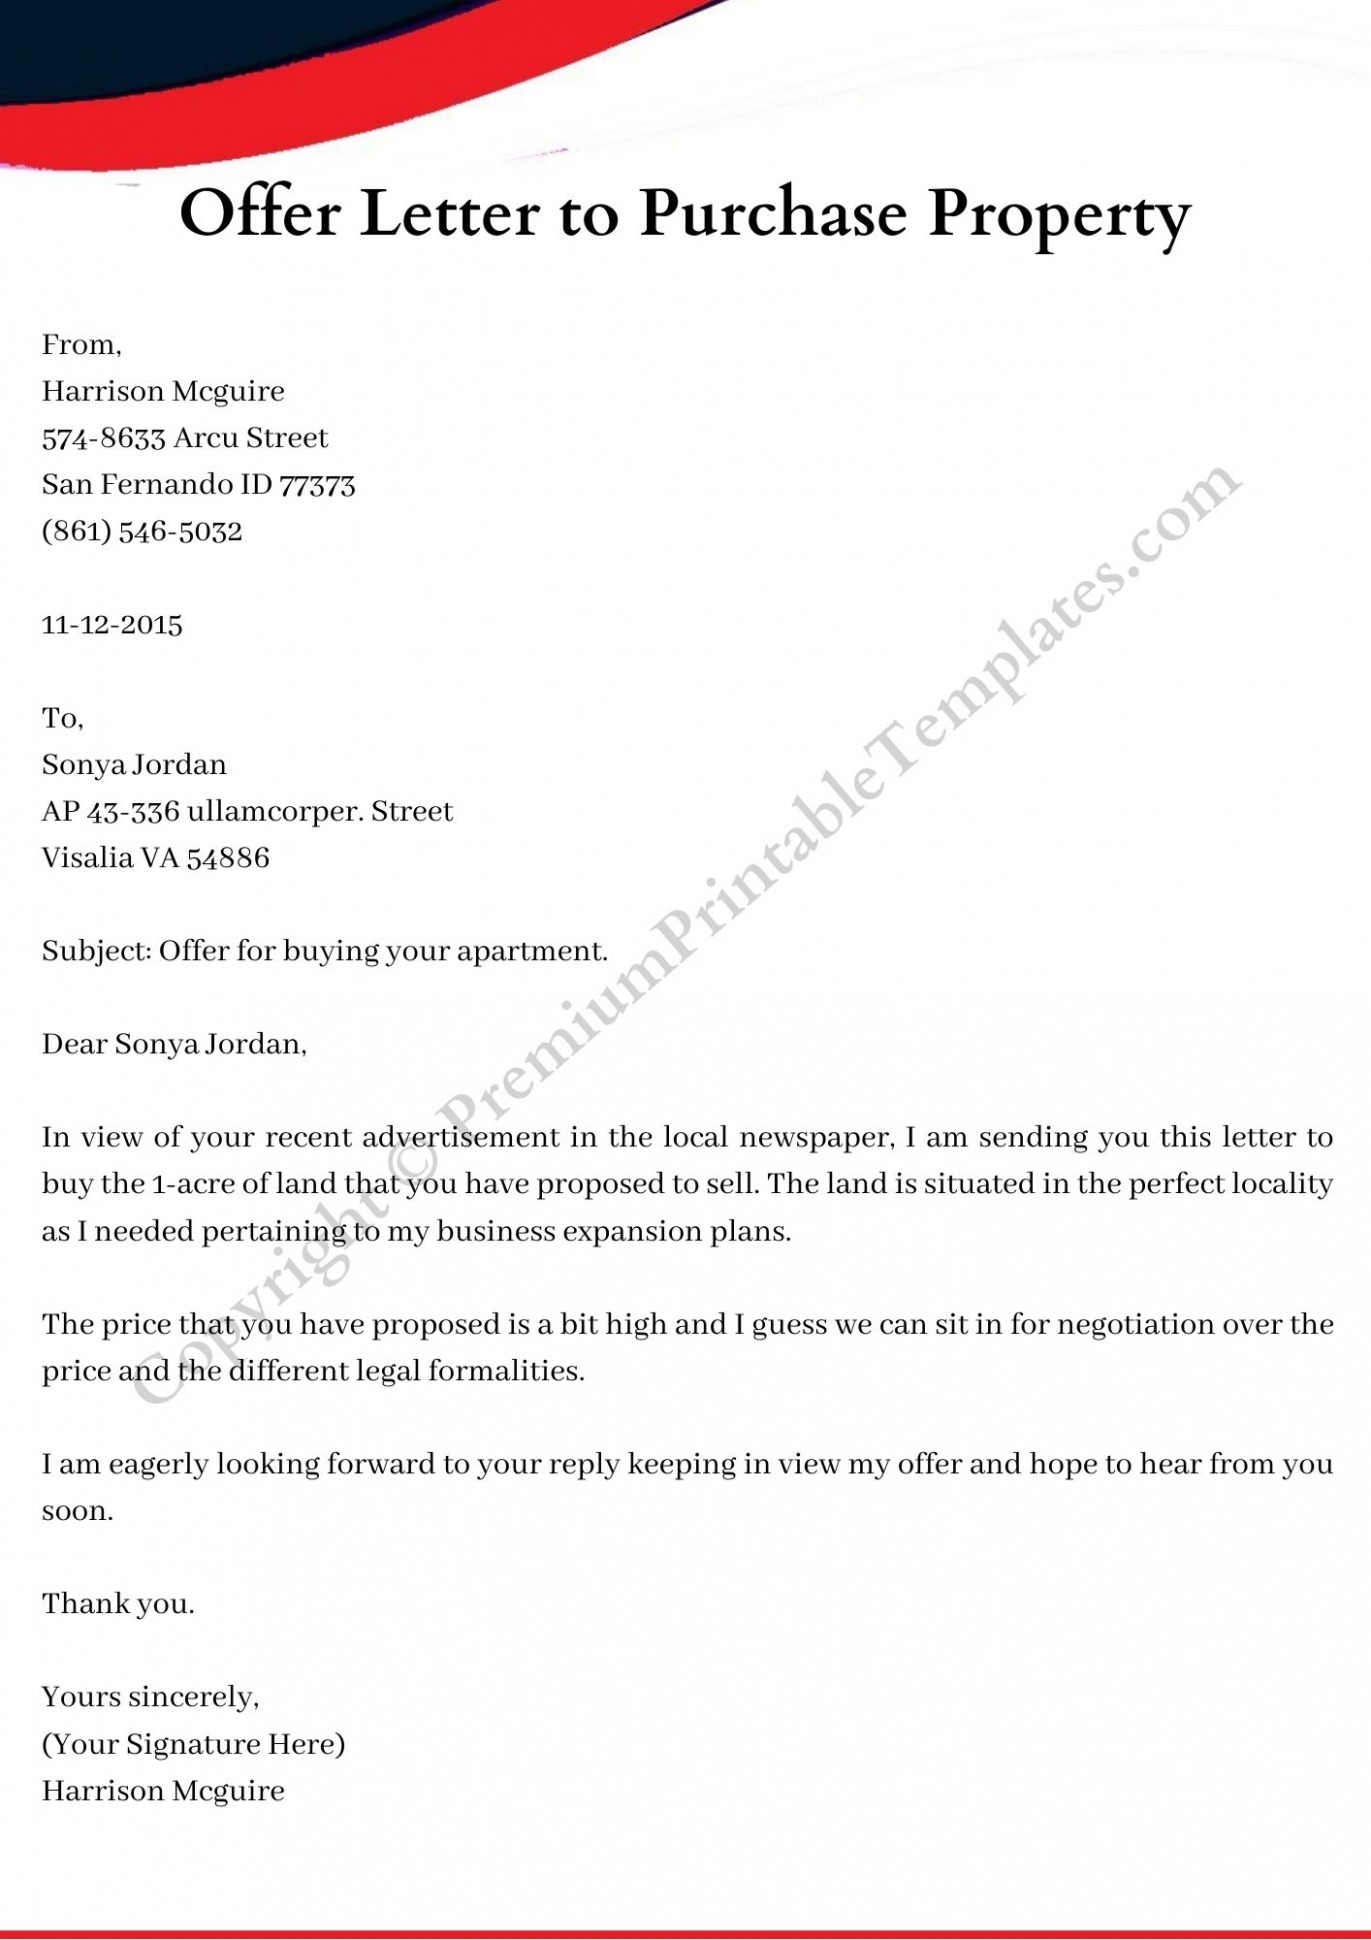 Free Offer Letter To Purchase Property Template Sample